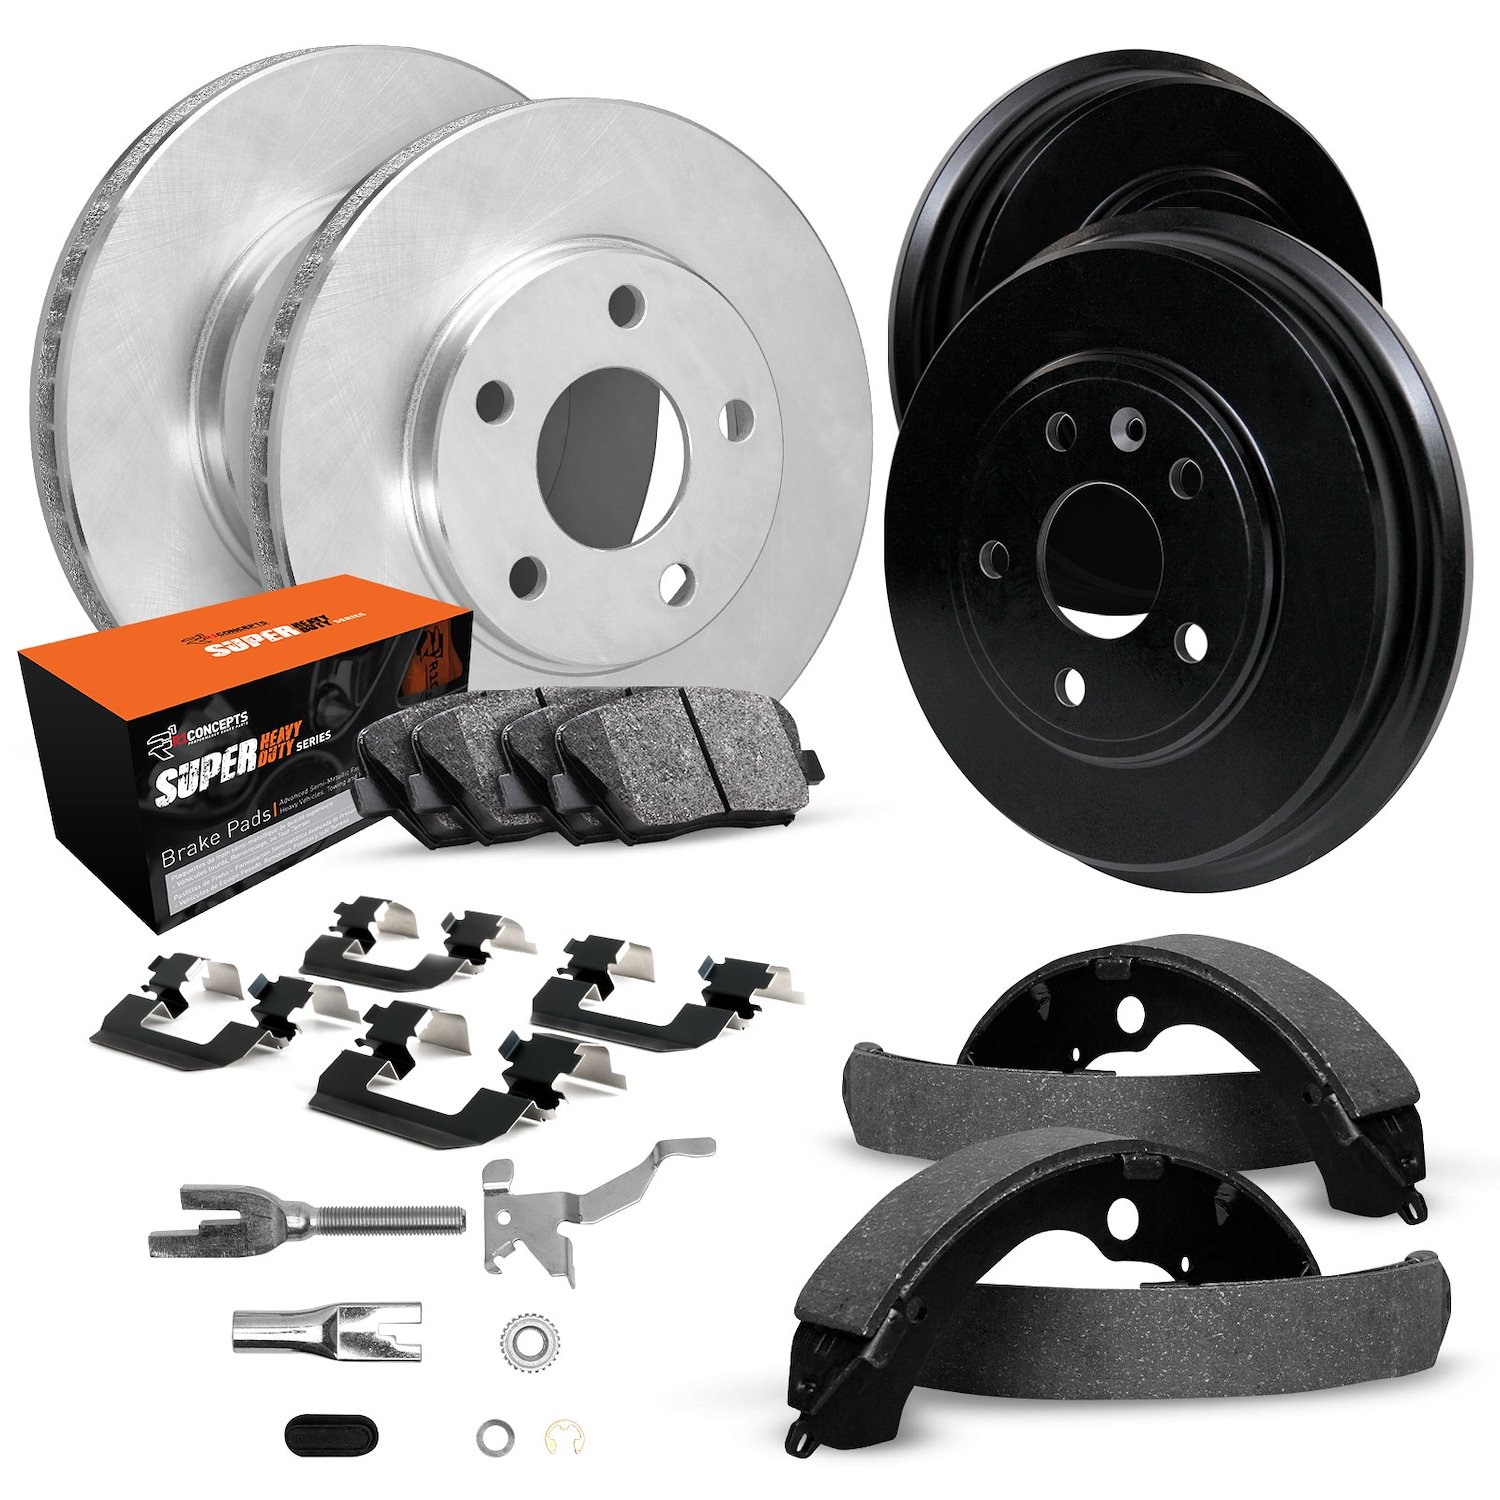 E-Line Blank Brake Rotor & Drum Set w/Super-Duty Pads, Shoes, Hardware, & Adjusters, 1976-1978 GM, Position: Front & Rear